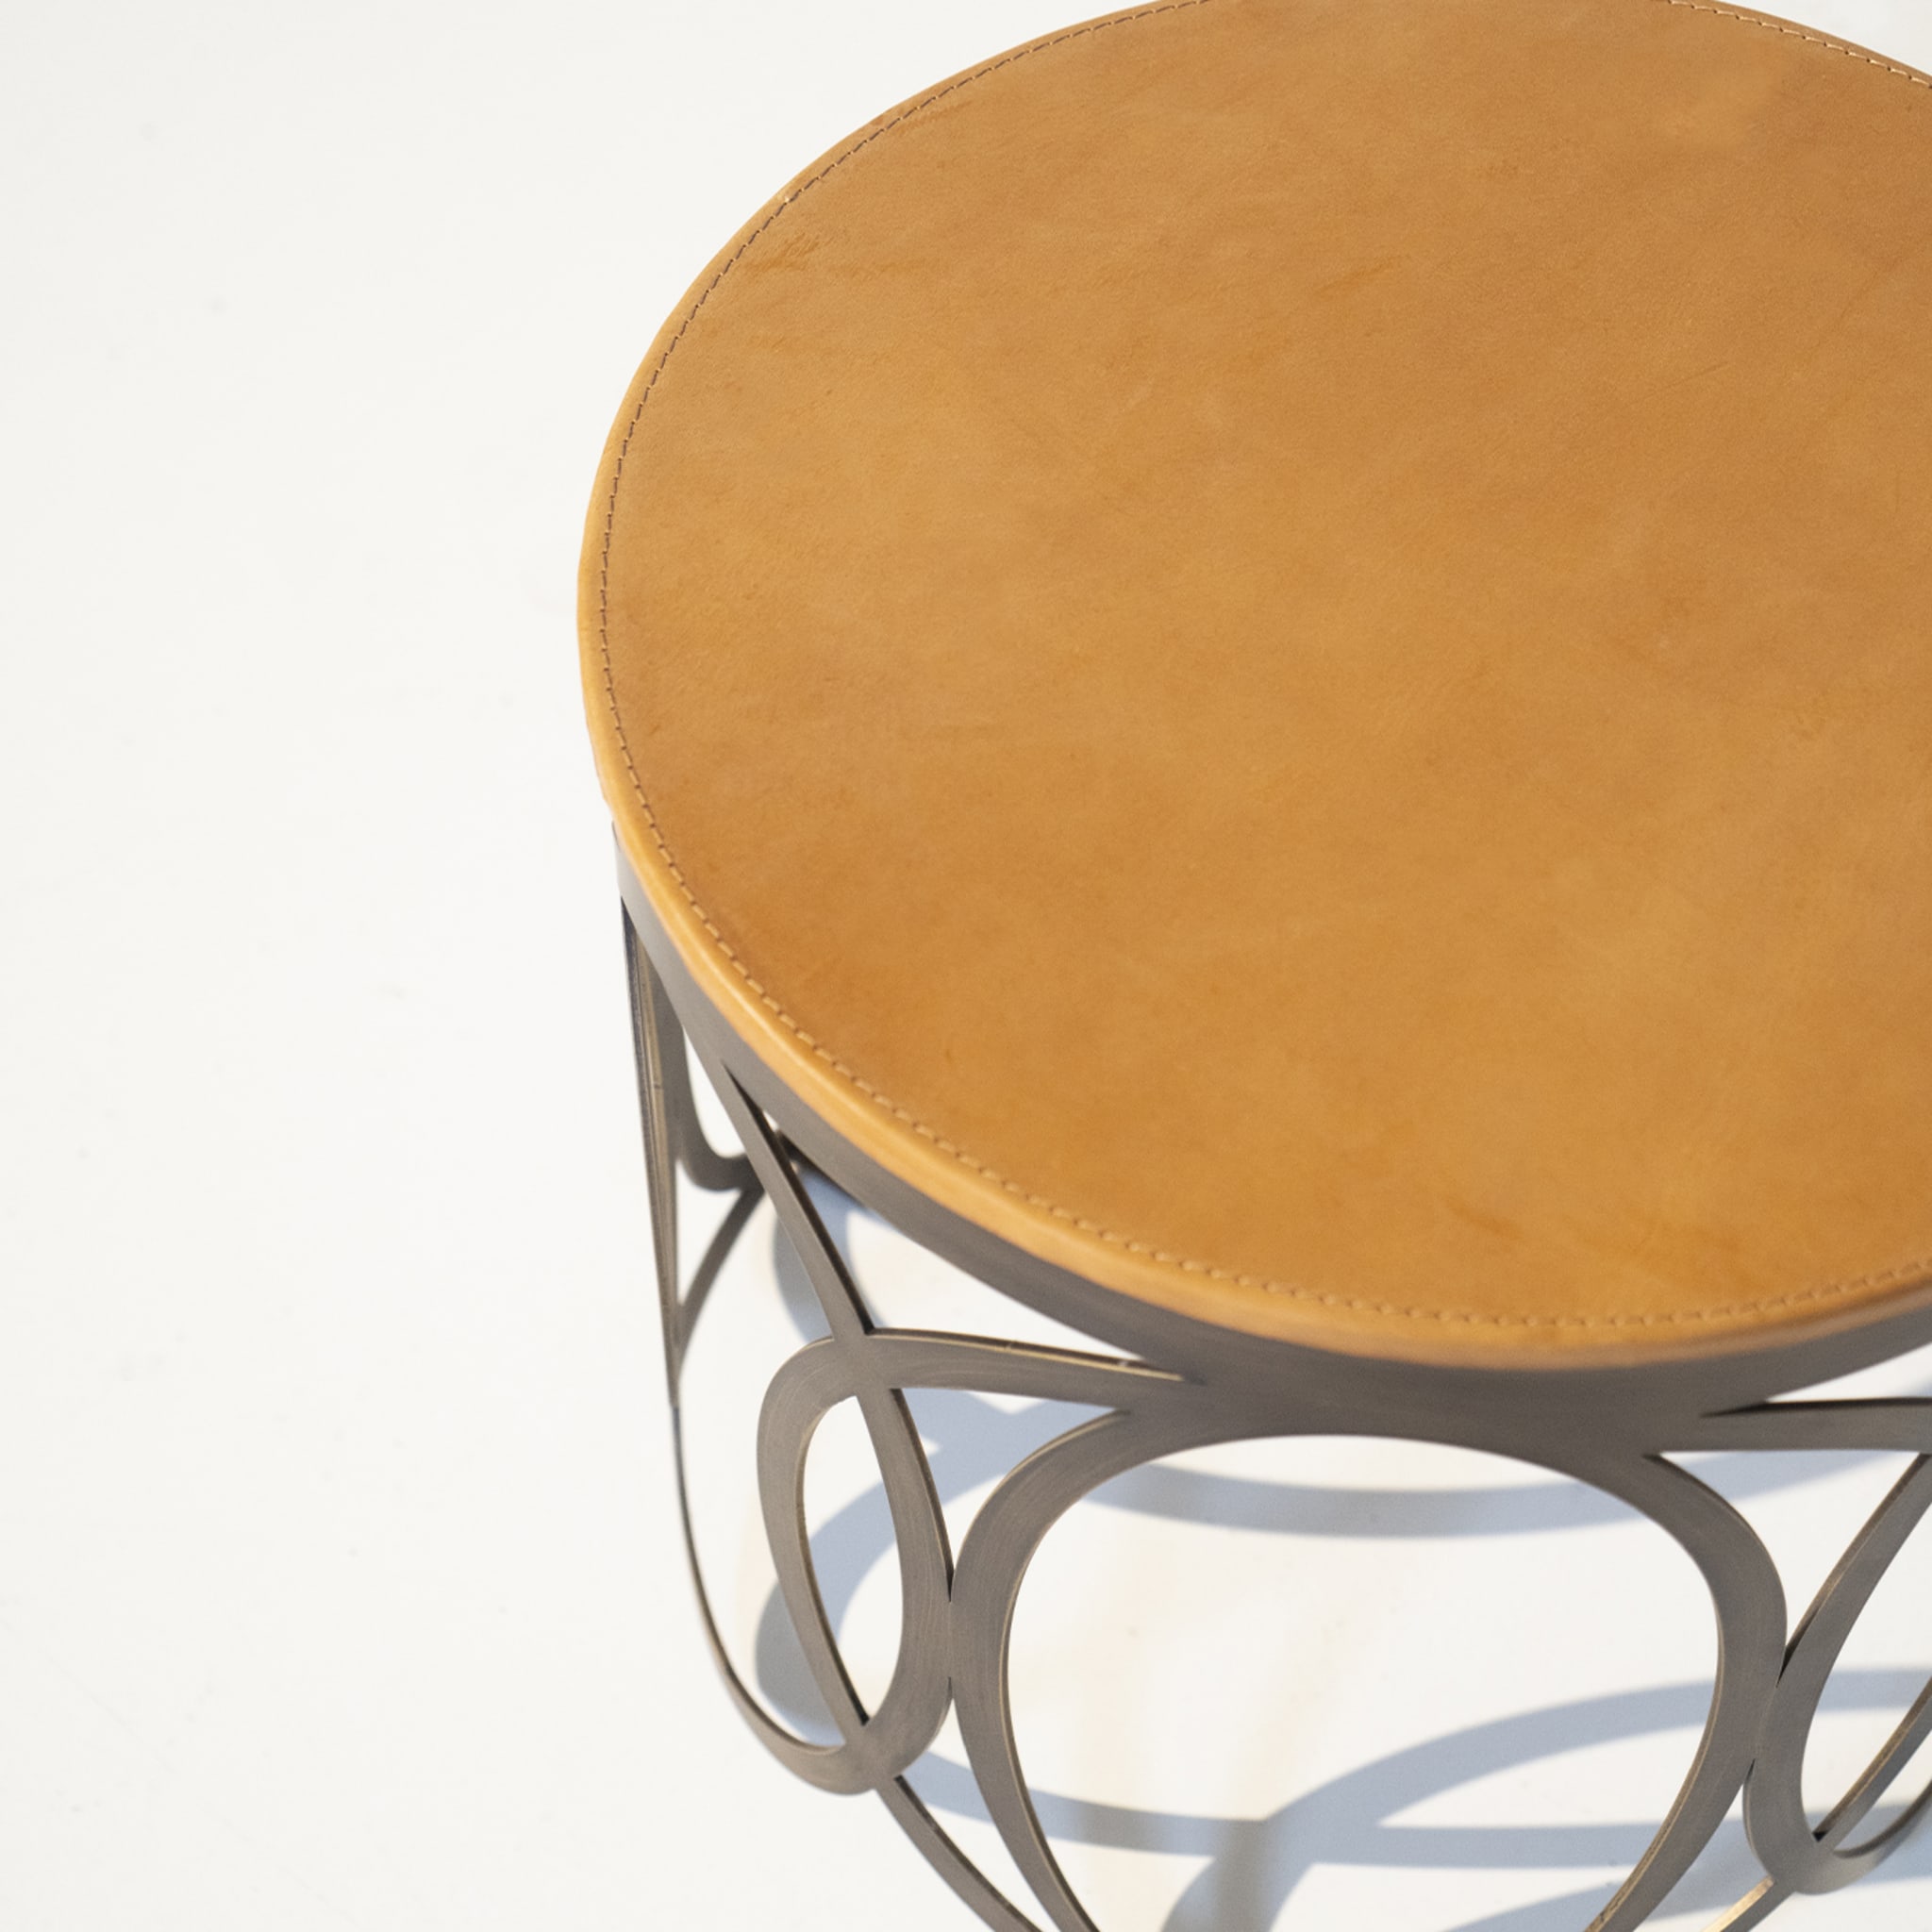 Valzer Table Tribeca Collection by Marco and Giulio Mantellassi - Alternative view 2